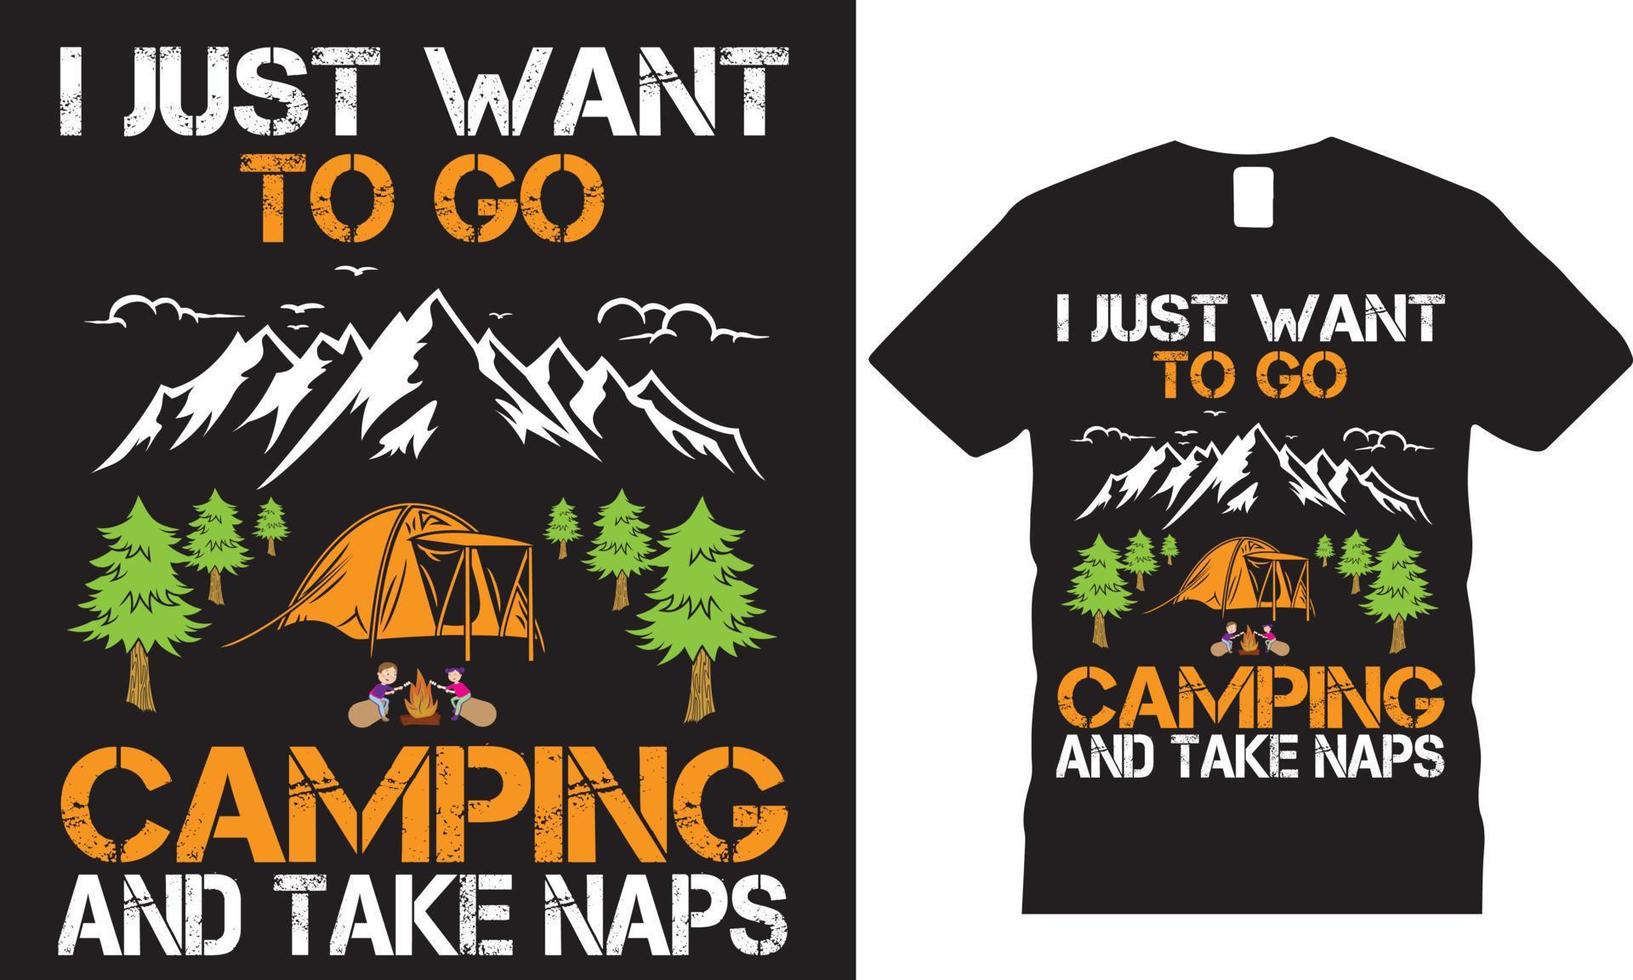 i just want to go camping and take naps t-shirt design vector